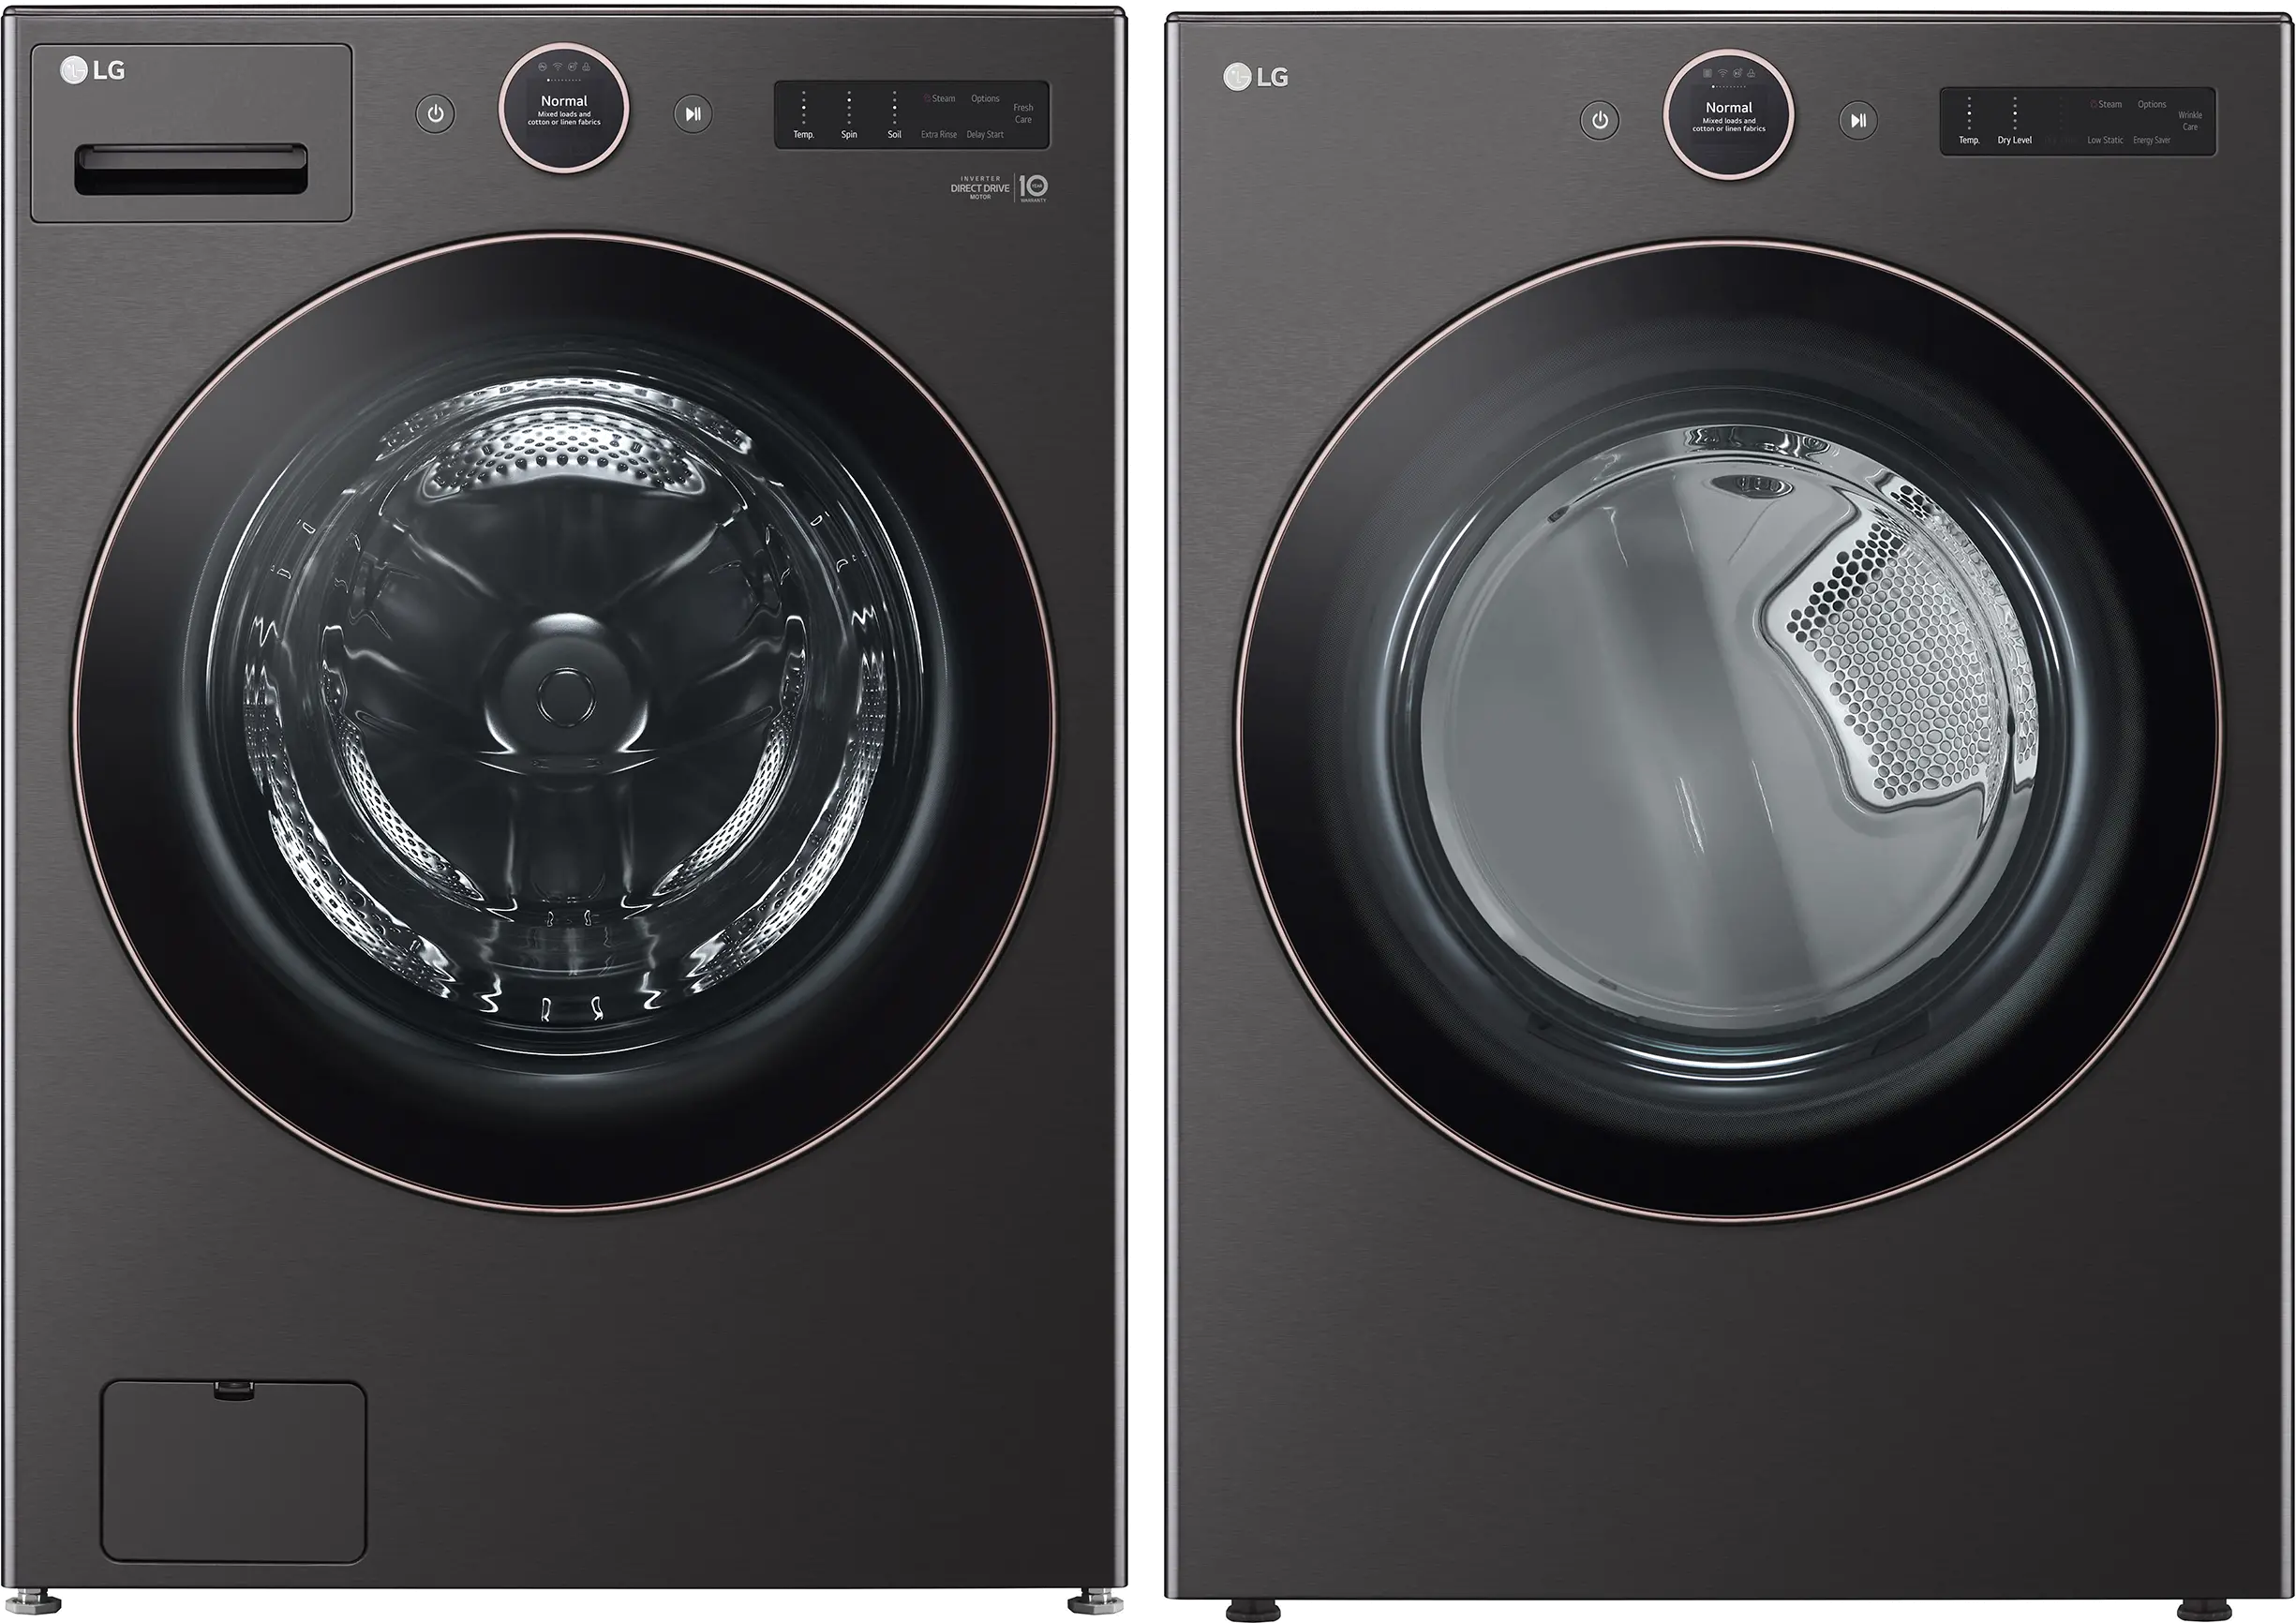 https://static.rcwilley.com/products/113034430/LG-Washer-and-Gas-Dryer-Set---Black-Steel-6500B-rcwilley-image1.webp